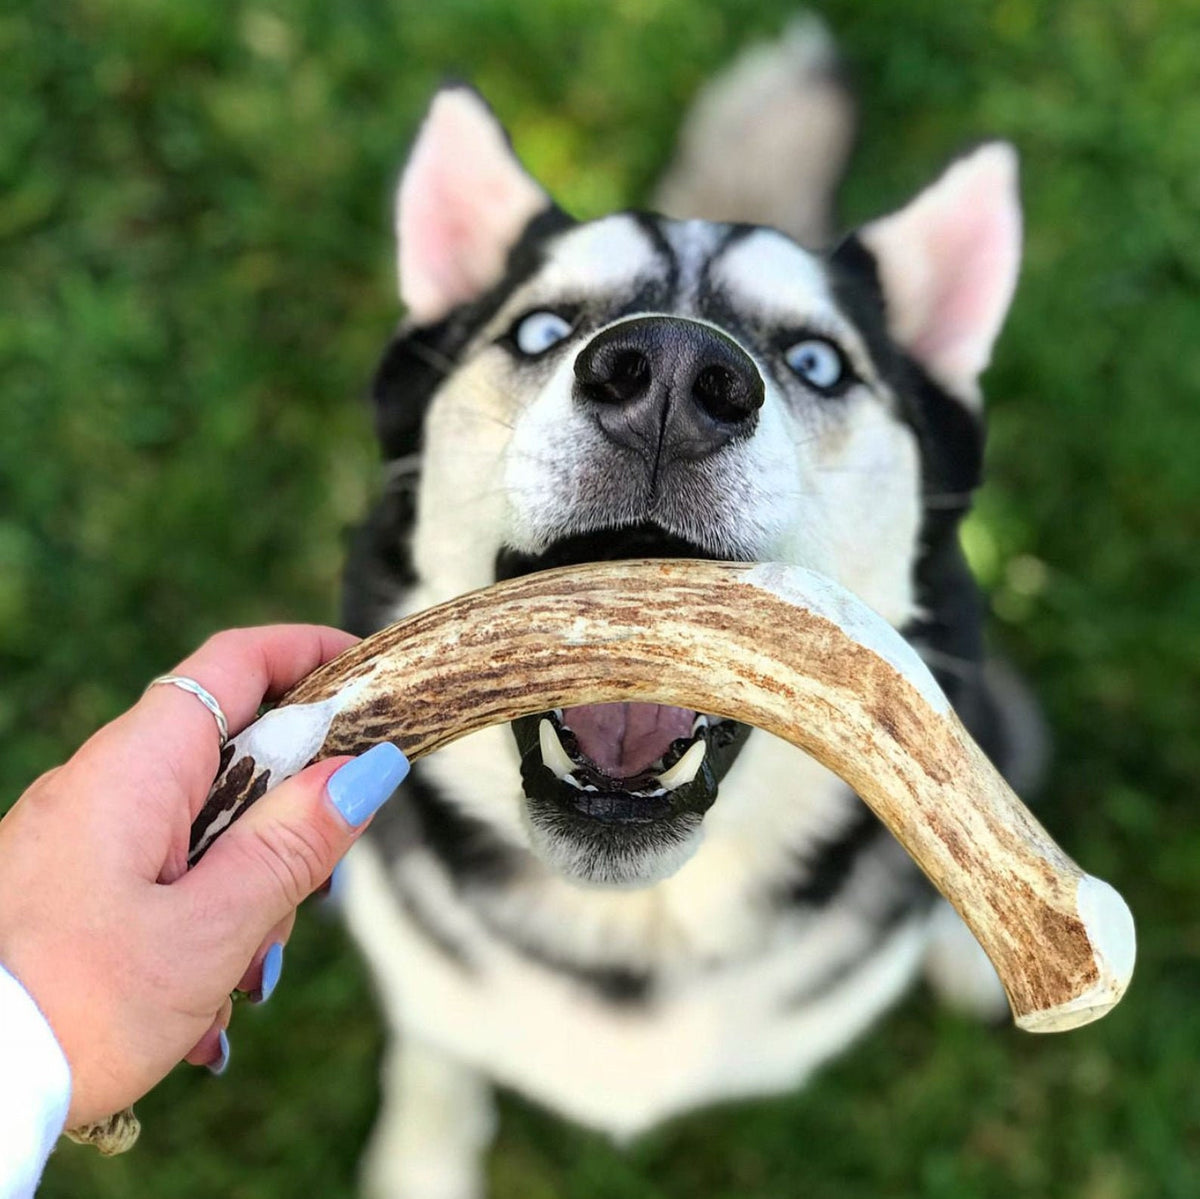 Large Deer Antler-All Natural, Grade A, Premium Antler Dog Treats, Organic Dog Chews, Naturally Shed Antlers from USA